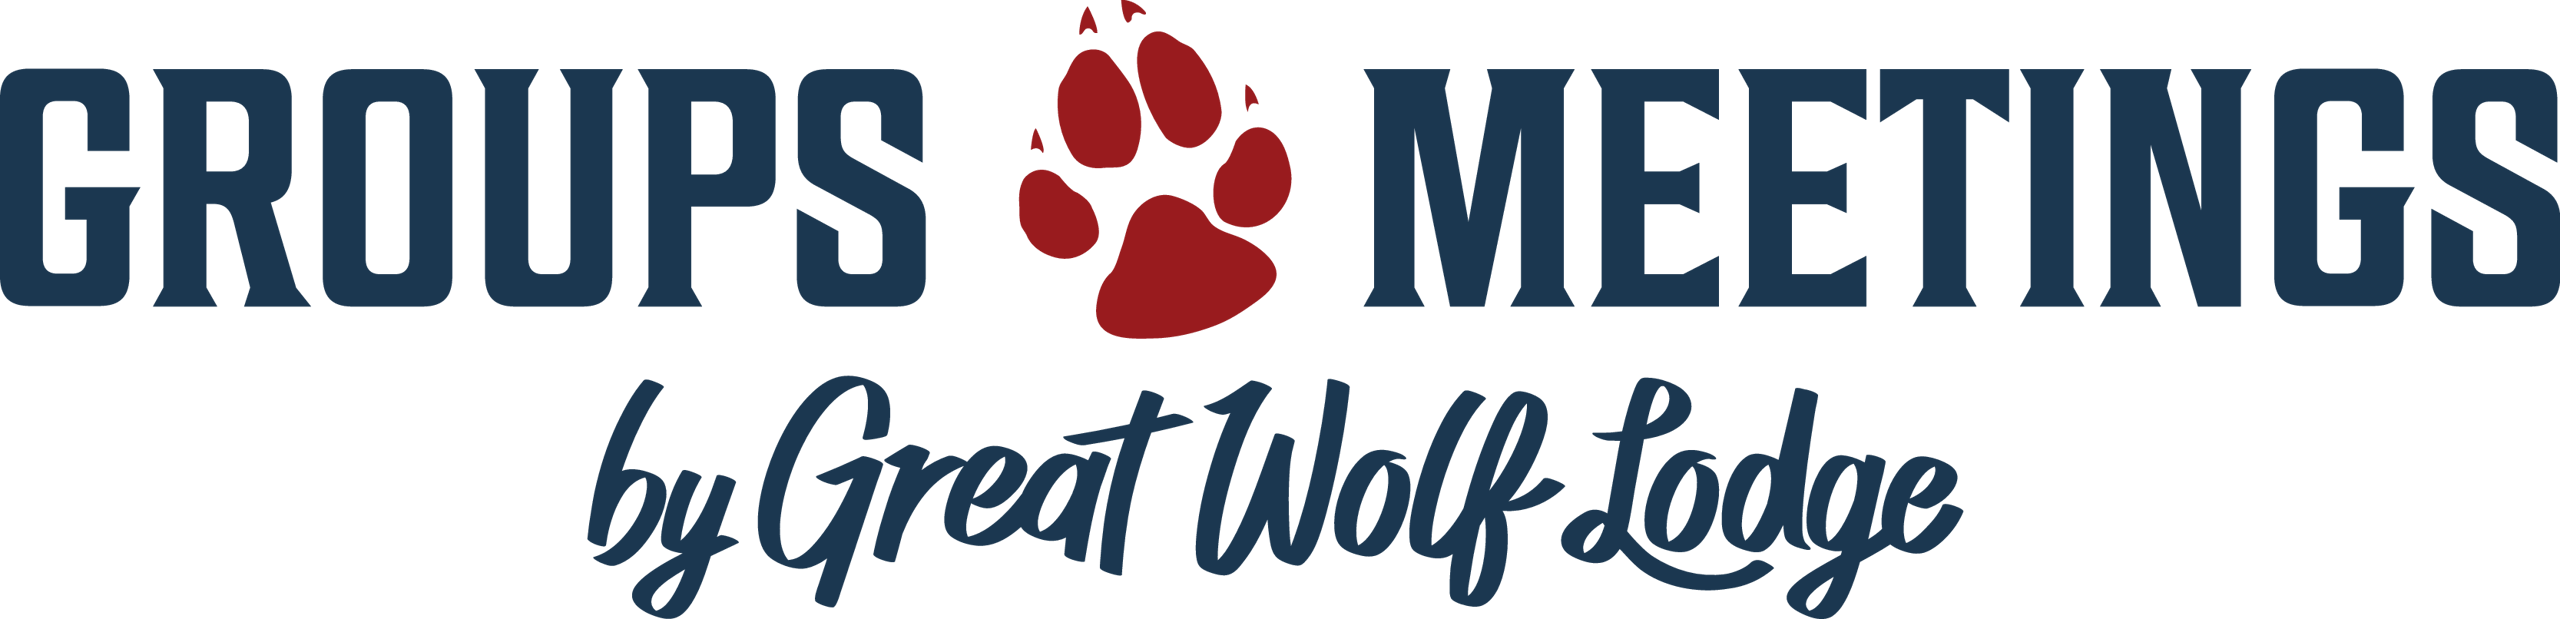 great wolf lodge groups and meetings logo